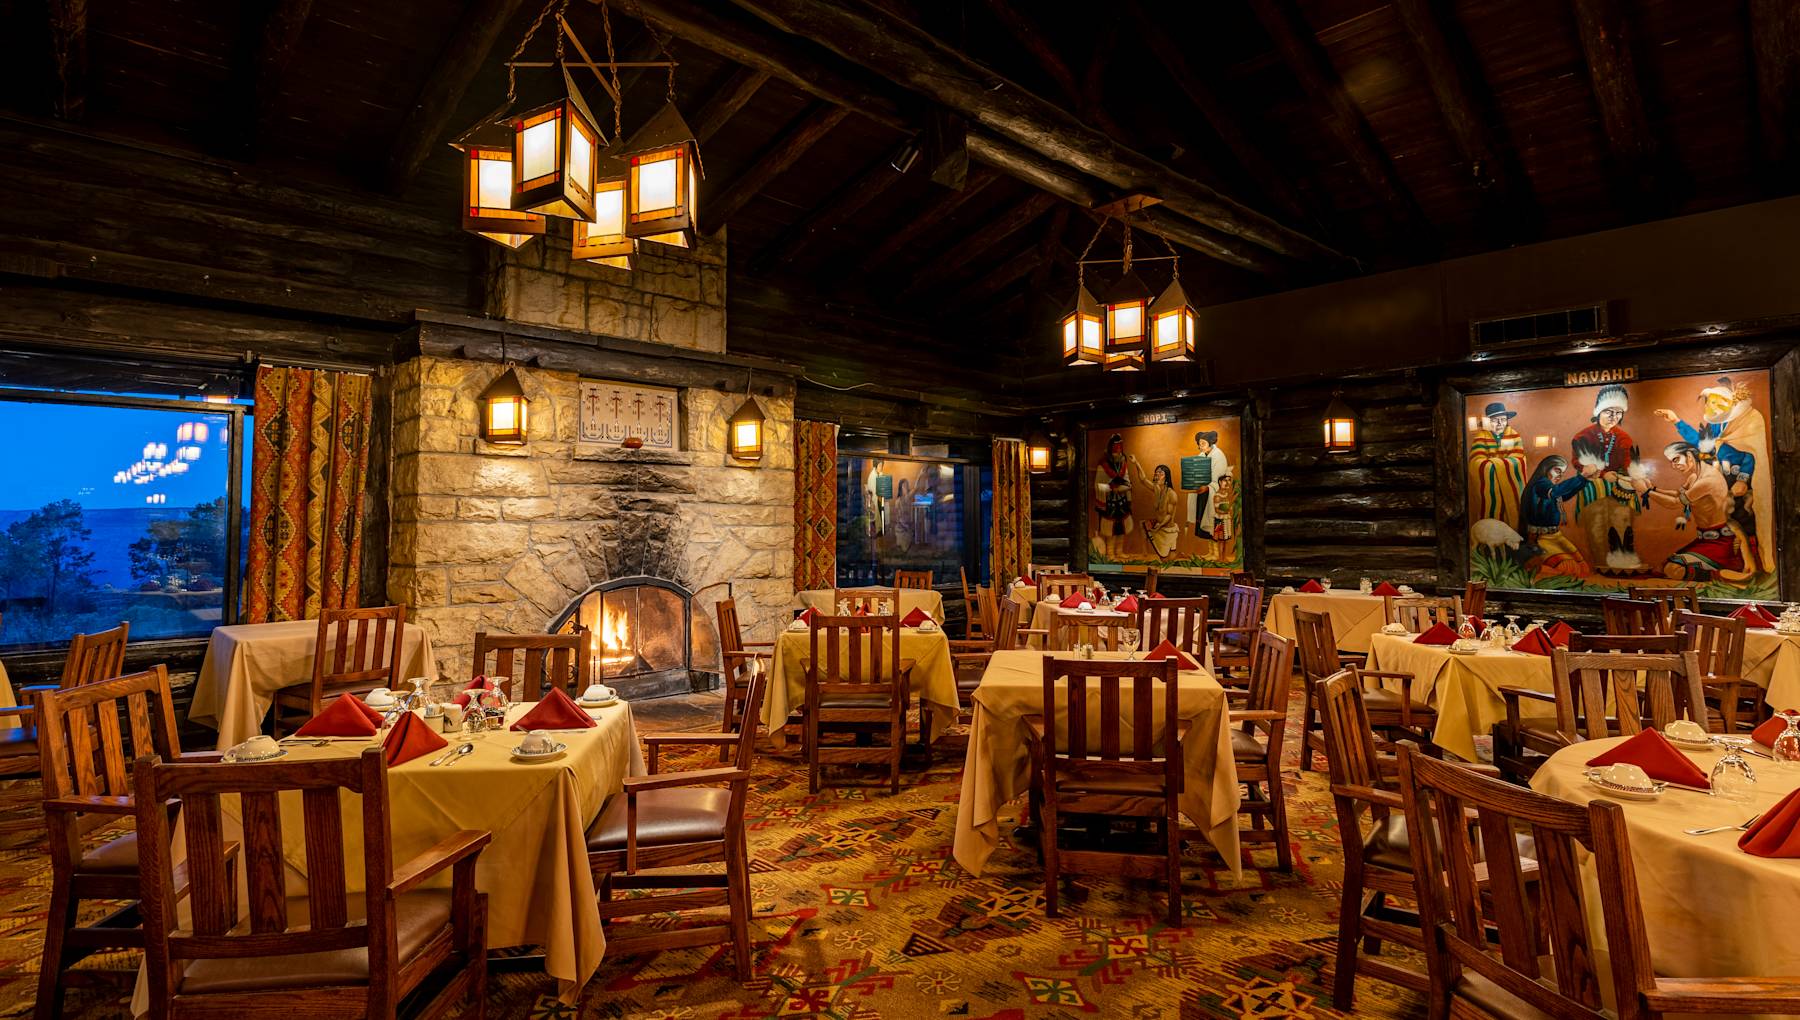 Grand Canyon Lodge Dining Room Prices